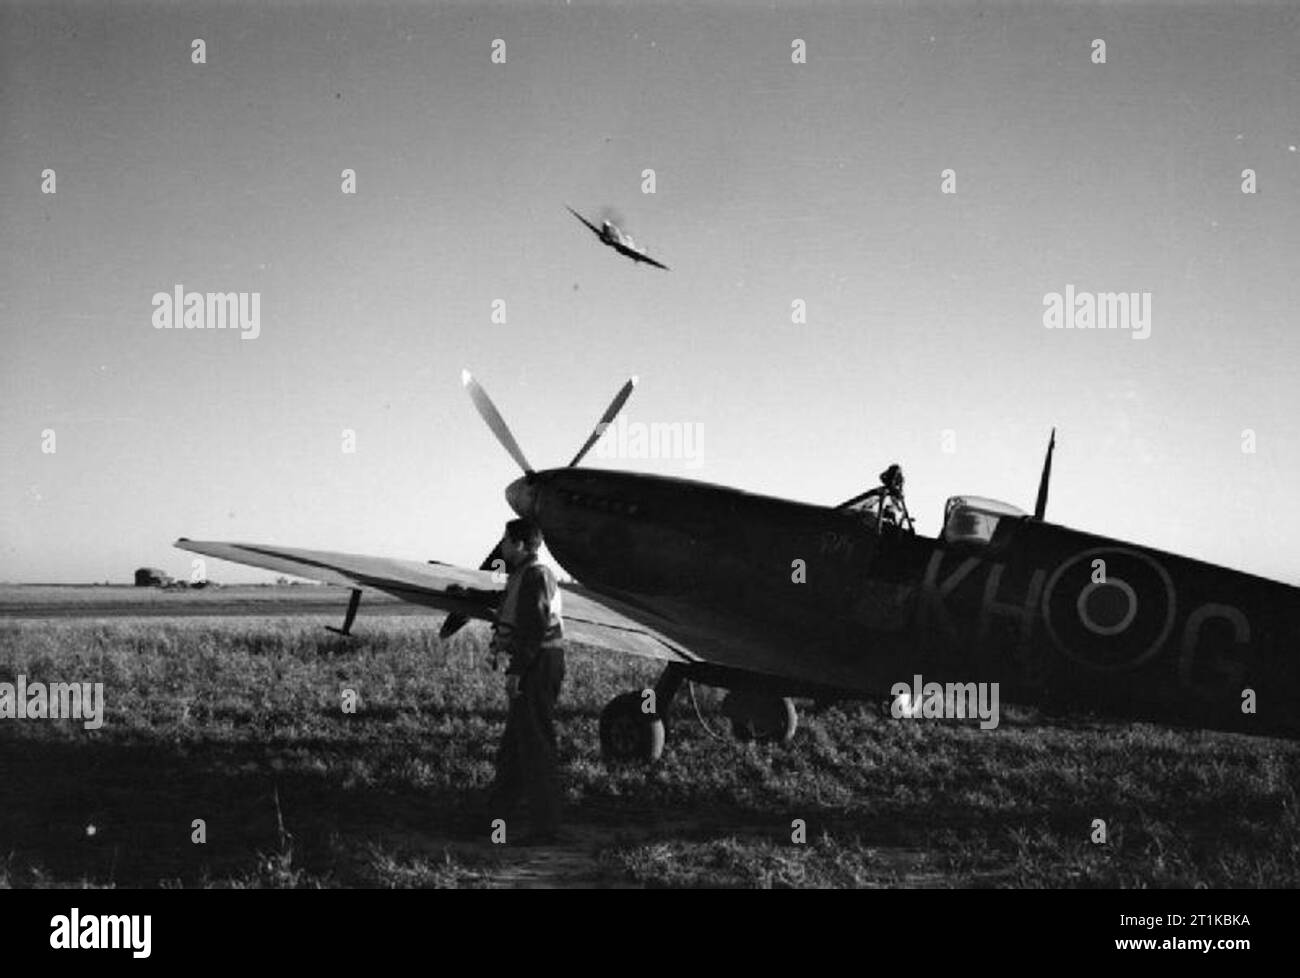 Royal Air Force- 2nd Tactical Air Force, 1943-1945. A Supermarine Spitfire of No. 127 (Canadian) Wing takes off on a dusk patrol from B2/Bazenville, Normandy, while a Spitfire Mark IX of No. 403 Squadron RCAF waits at readiness. Stock Photo